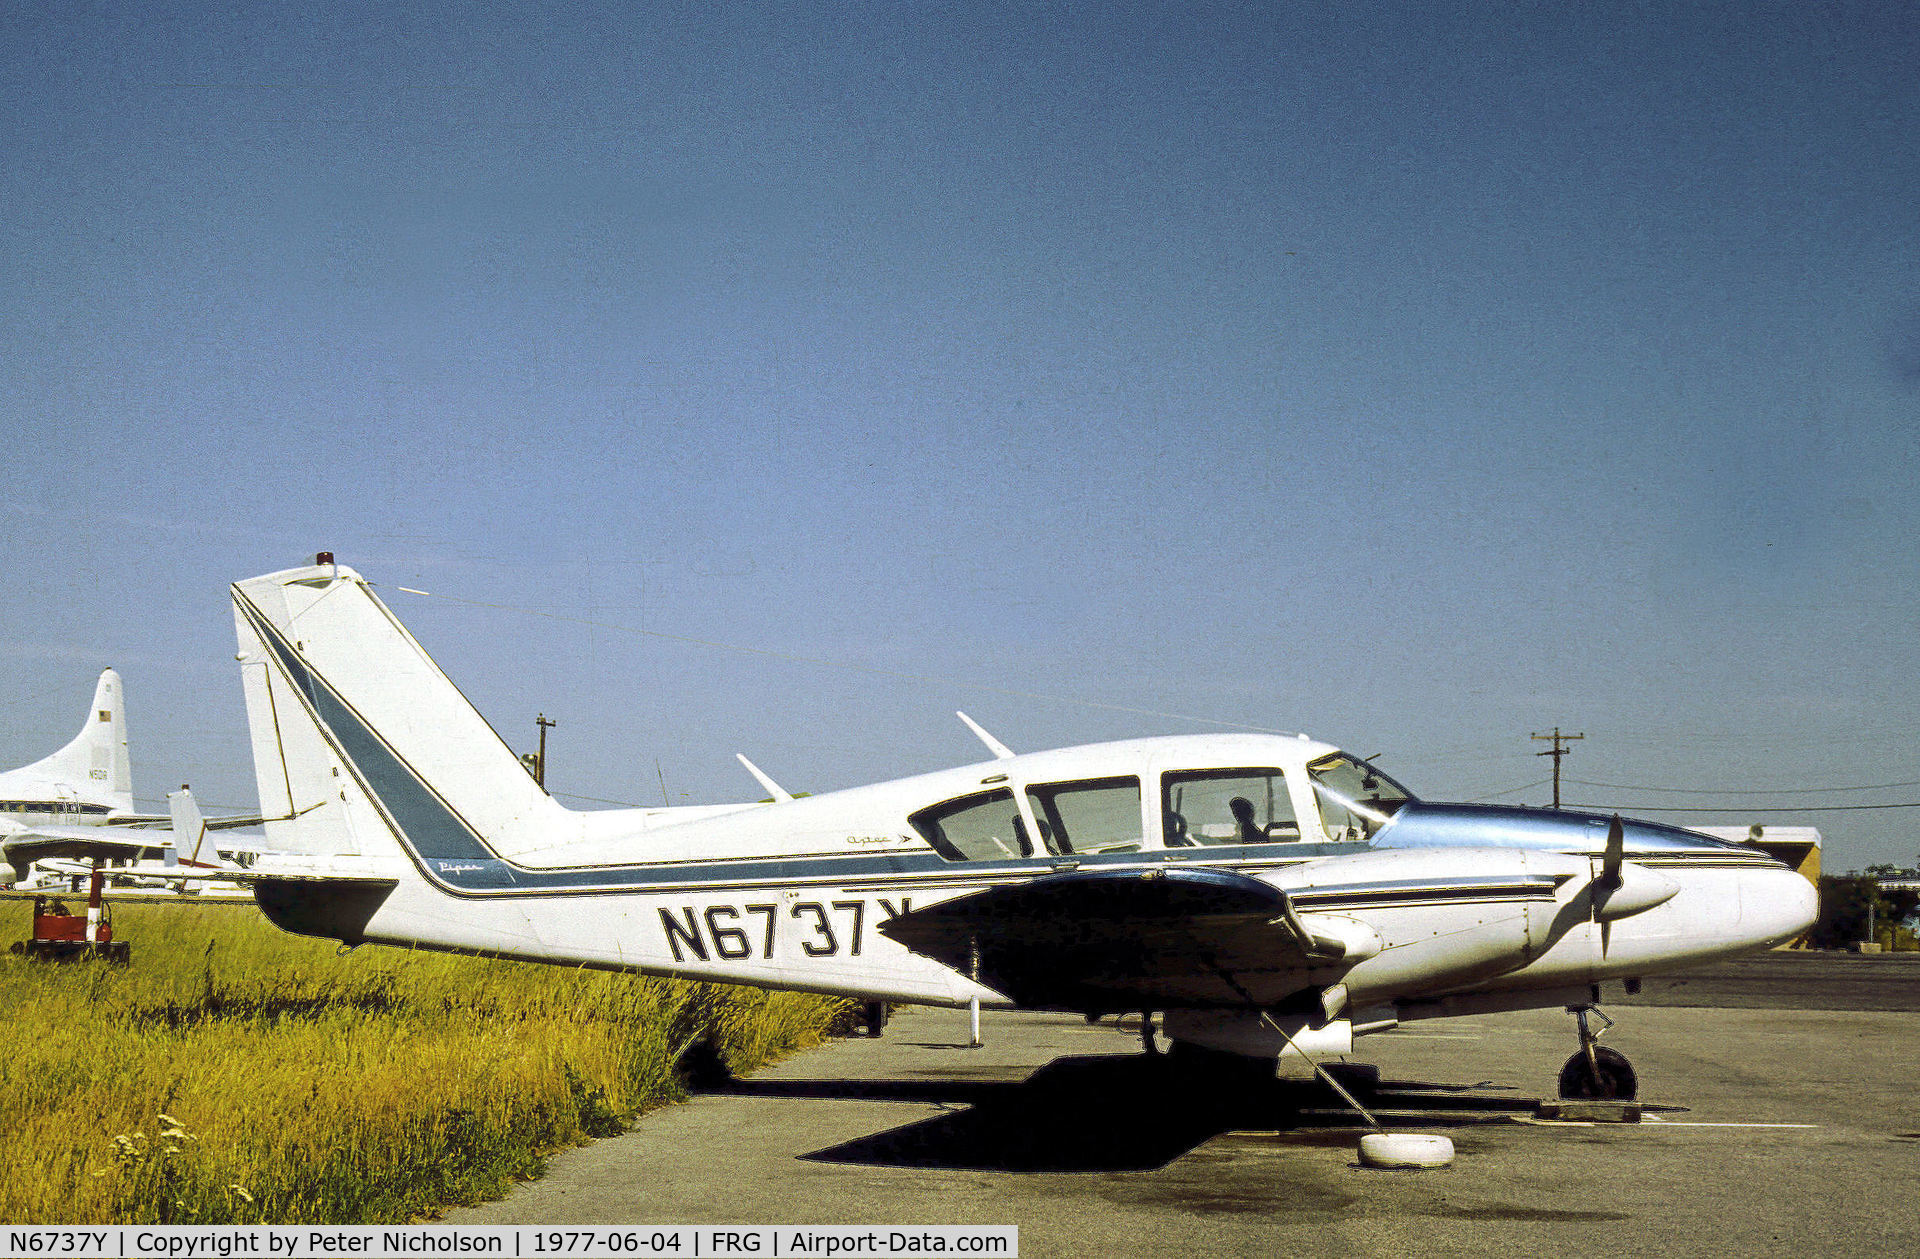 N6737Y, 1968 Piper PA-23-250 Aztec C/N 27-4071, This PA-23 Aztec 250 resident at Republic Airport on Long Island as seen in the Summer of 1977.